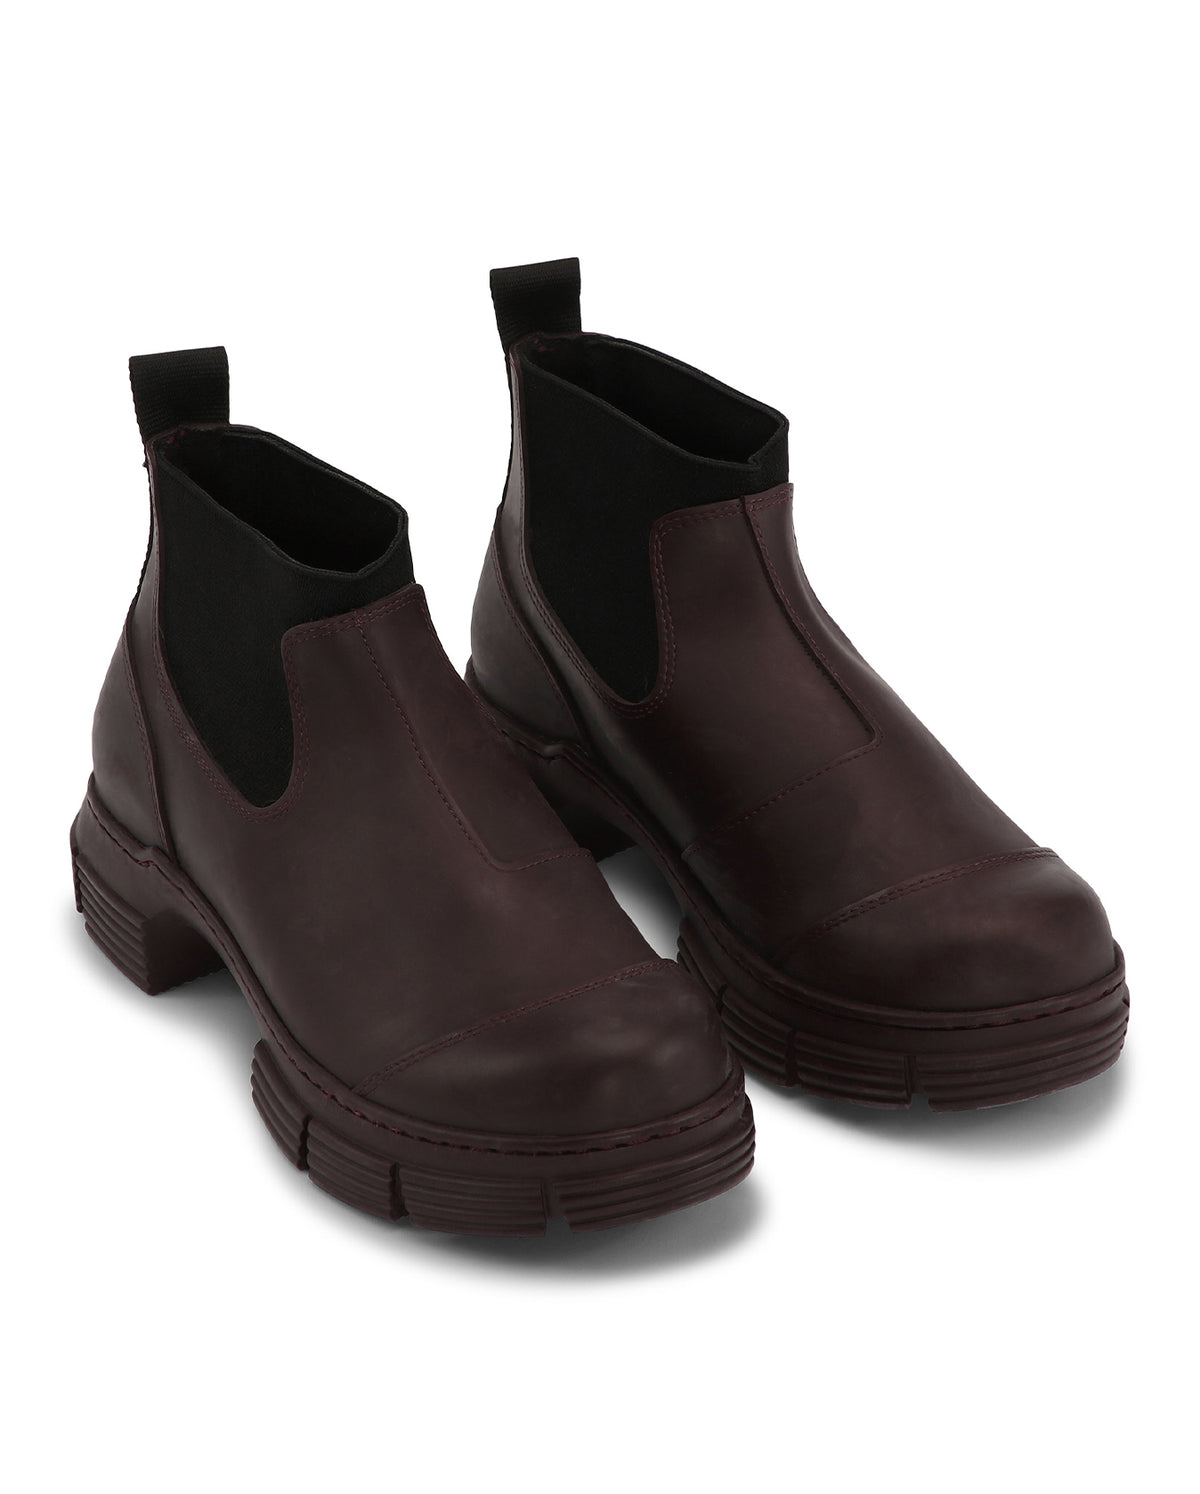 Recycled Rubber Crop City Boot - Burgundy